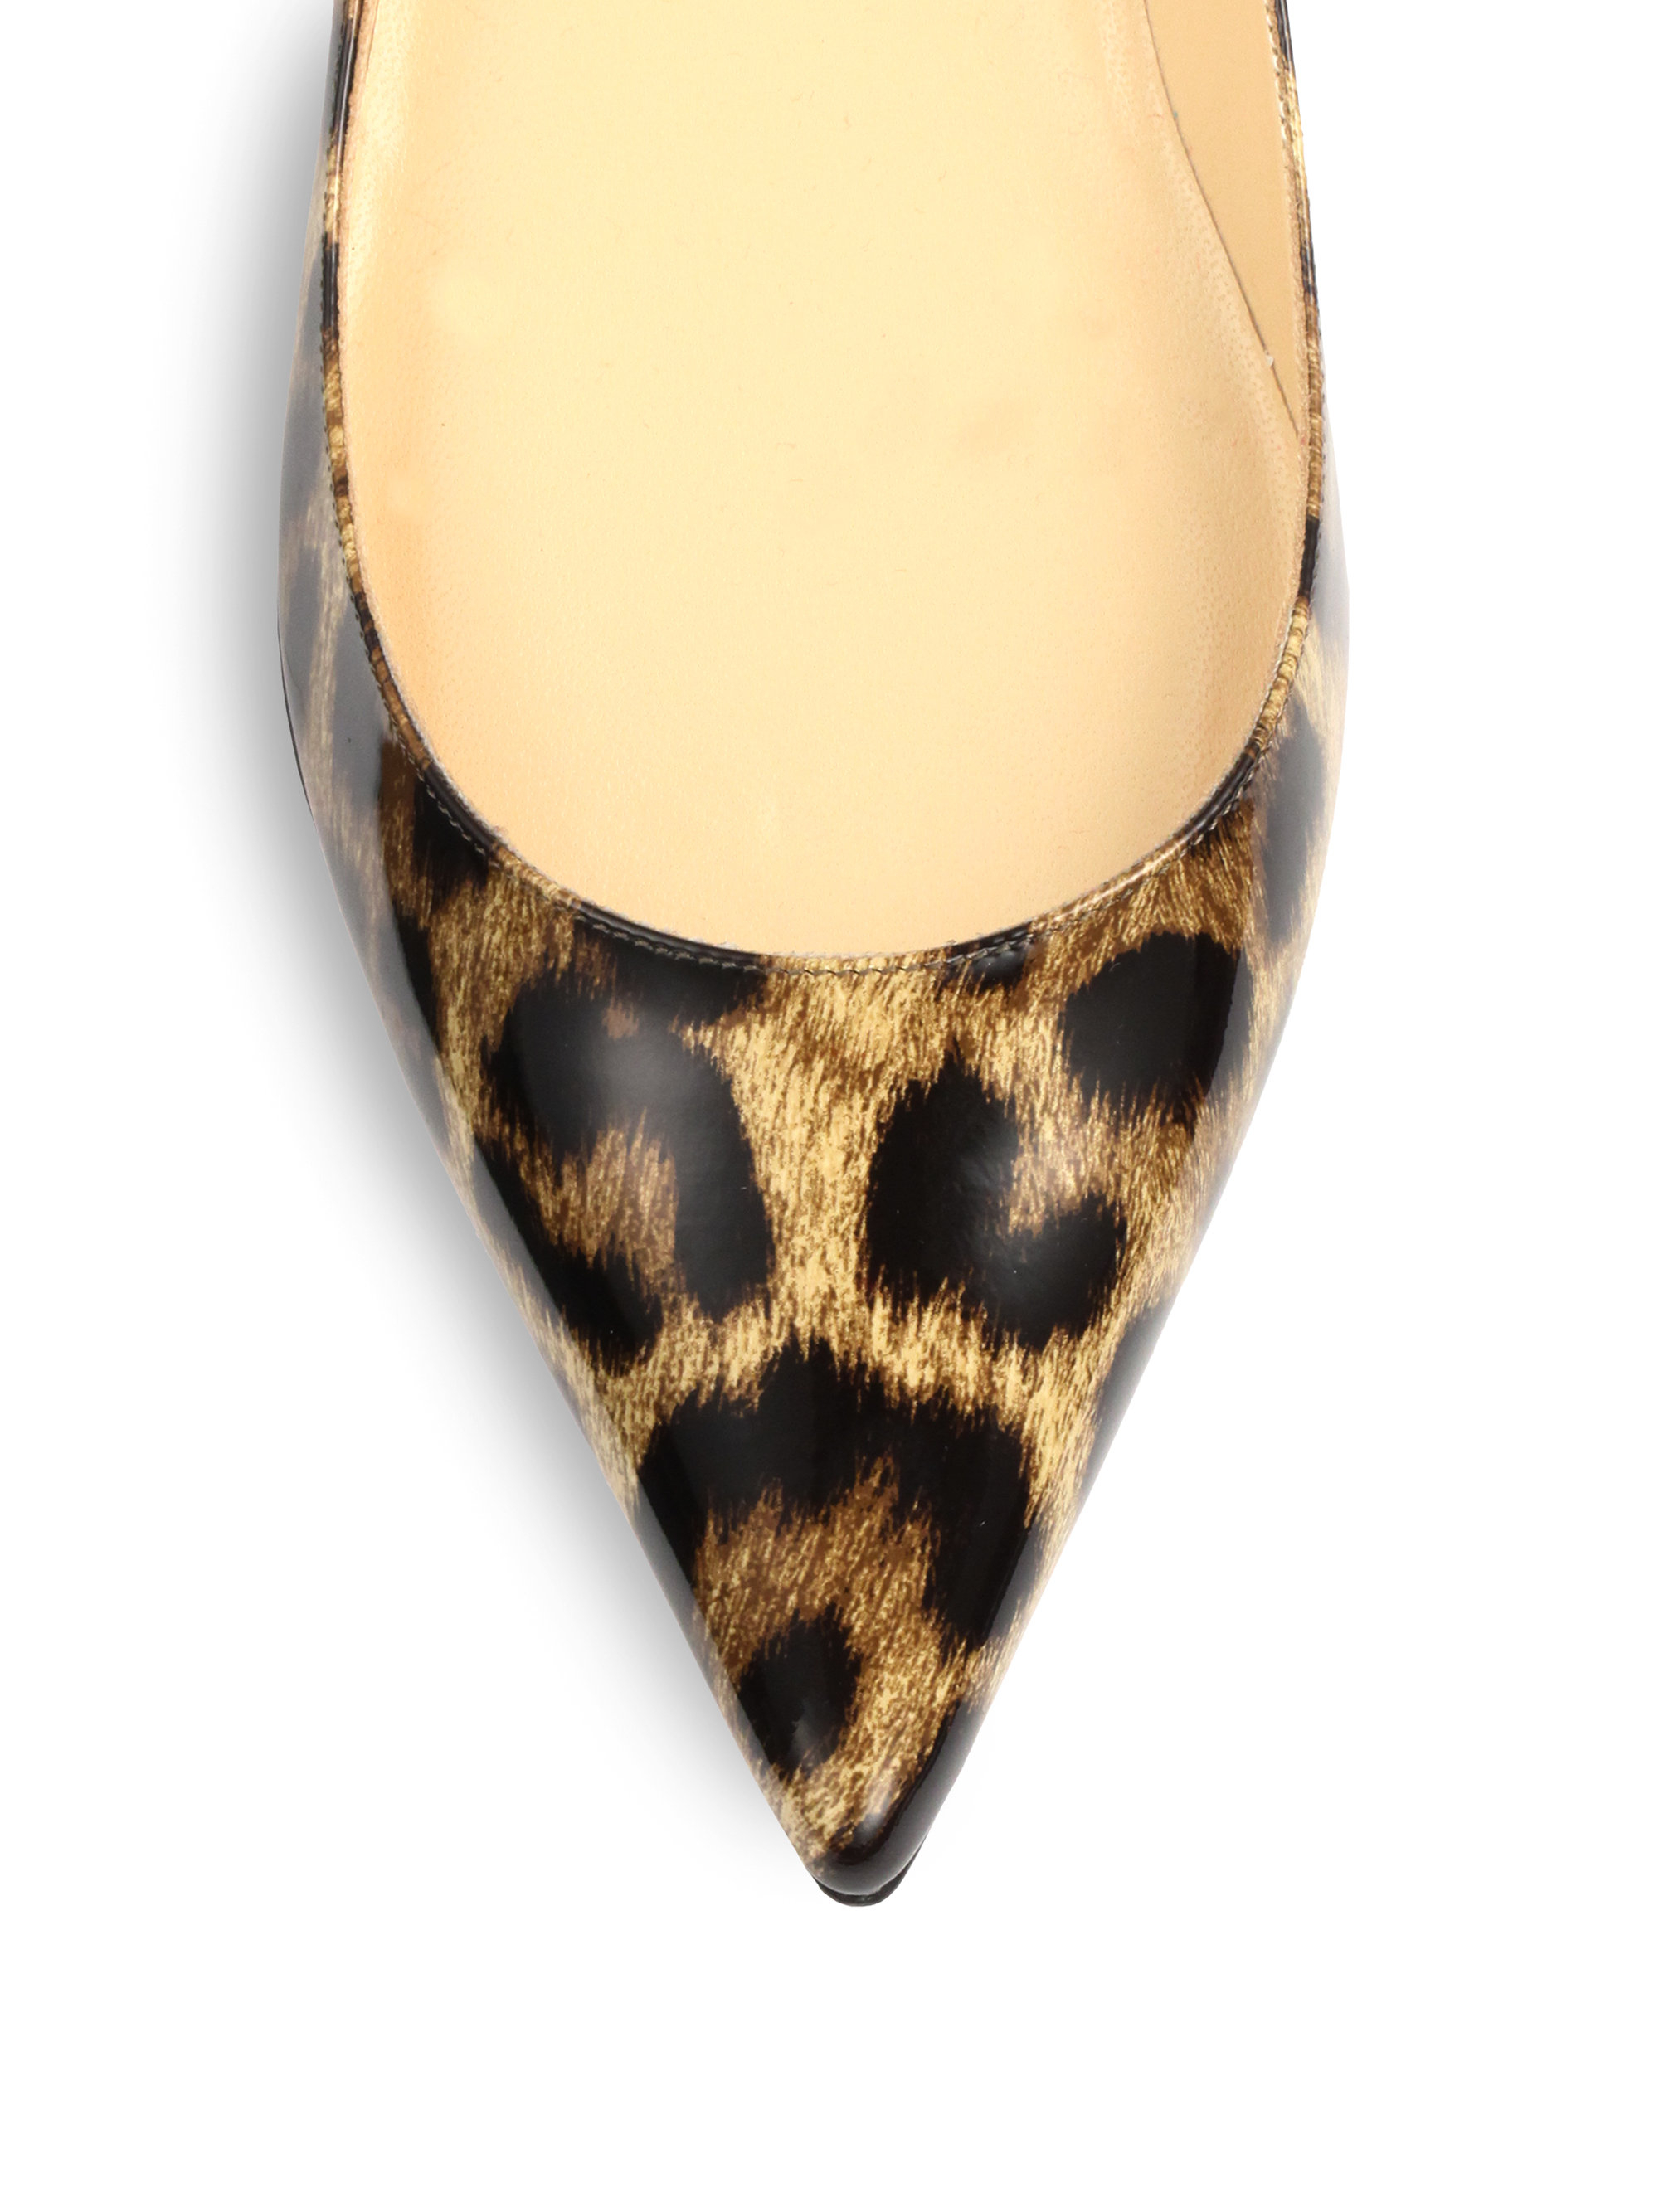 christian louboutin peep-toe flats Brown patent leather | The ...